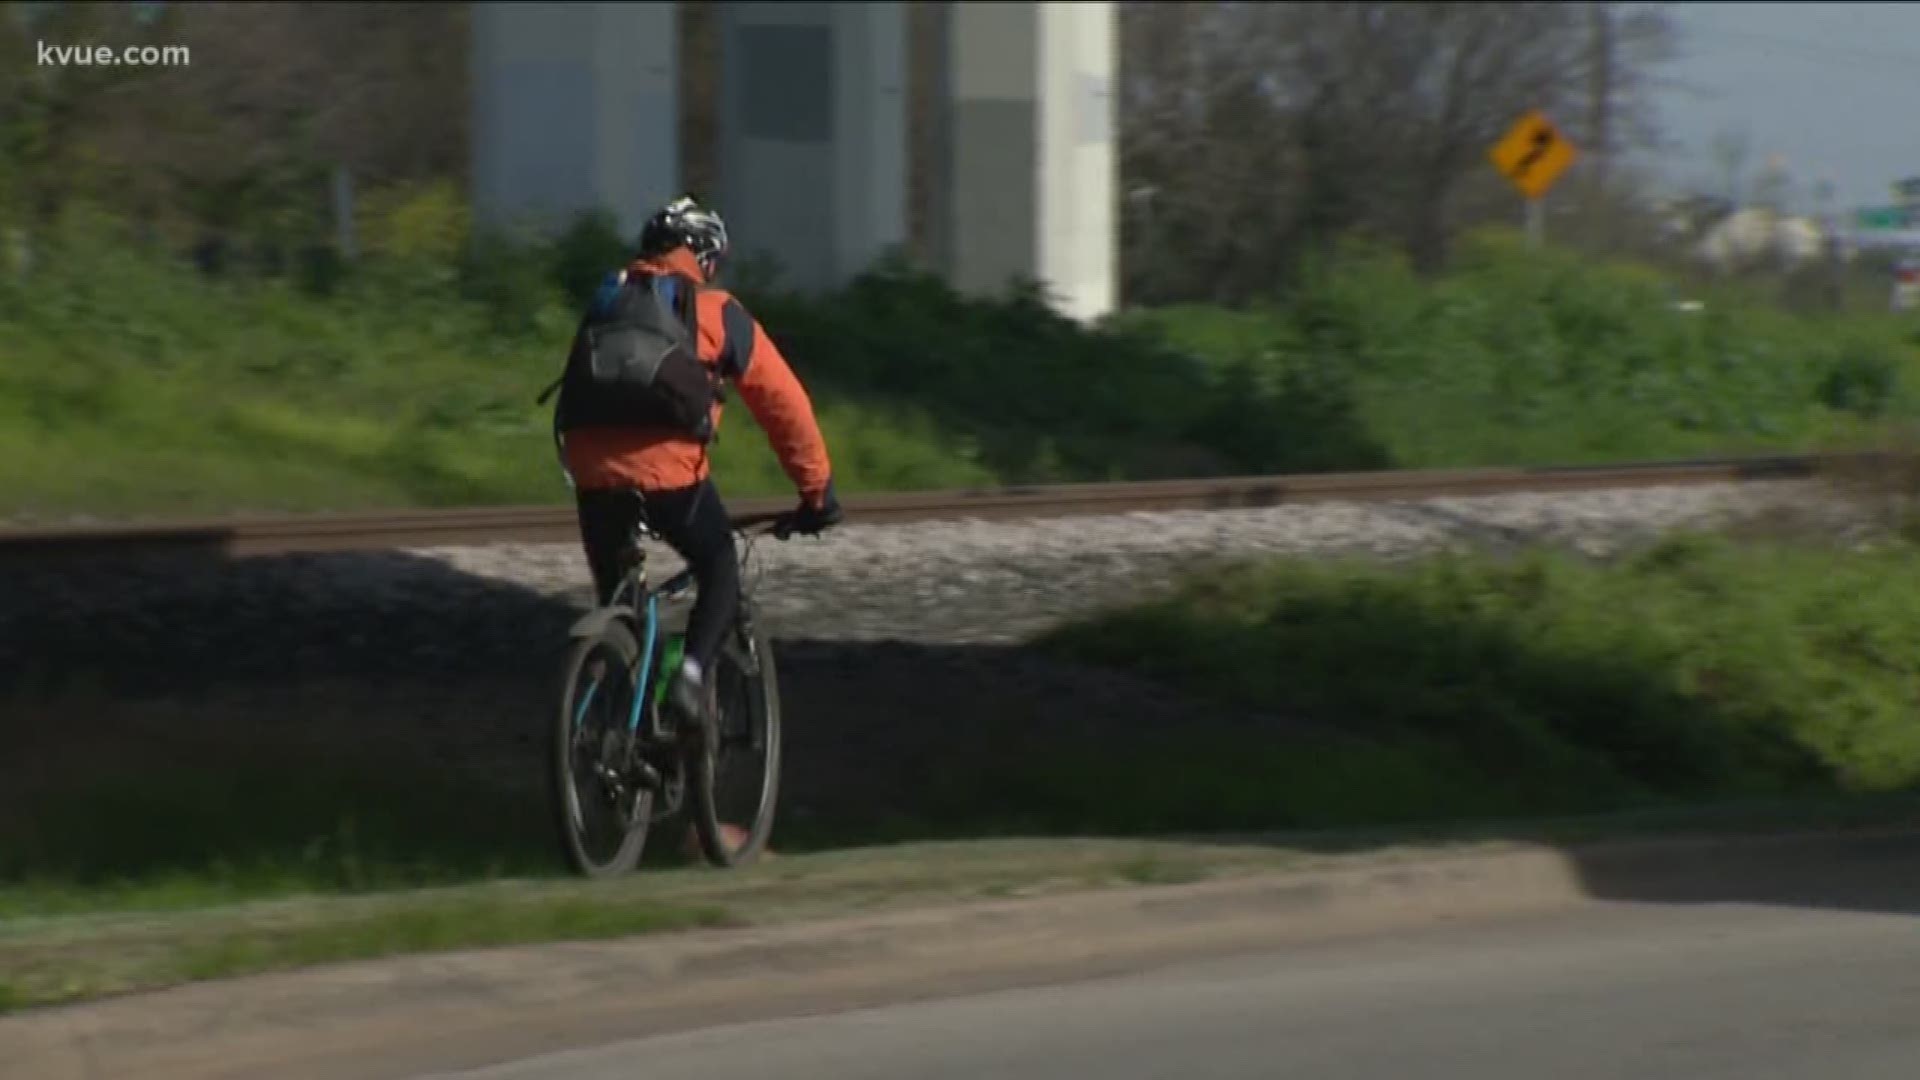 A cyclist said a new bike trail in North Austin is going to cause someone to get seriously hurt. It's right at the turnaround on the 183 frontage road near Mopac.